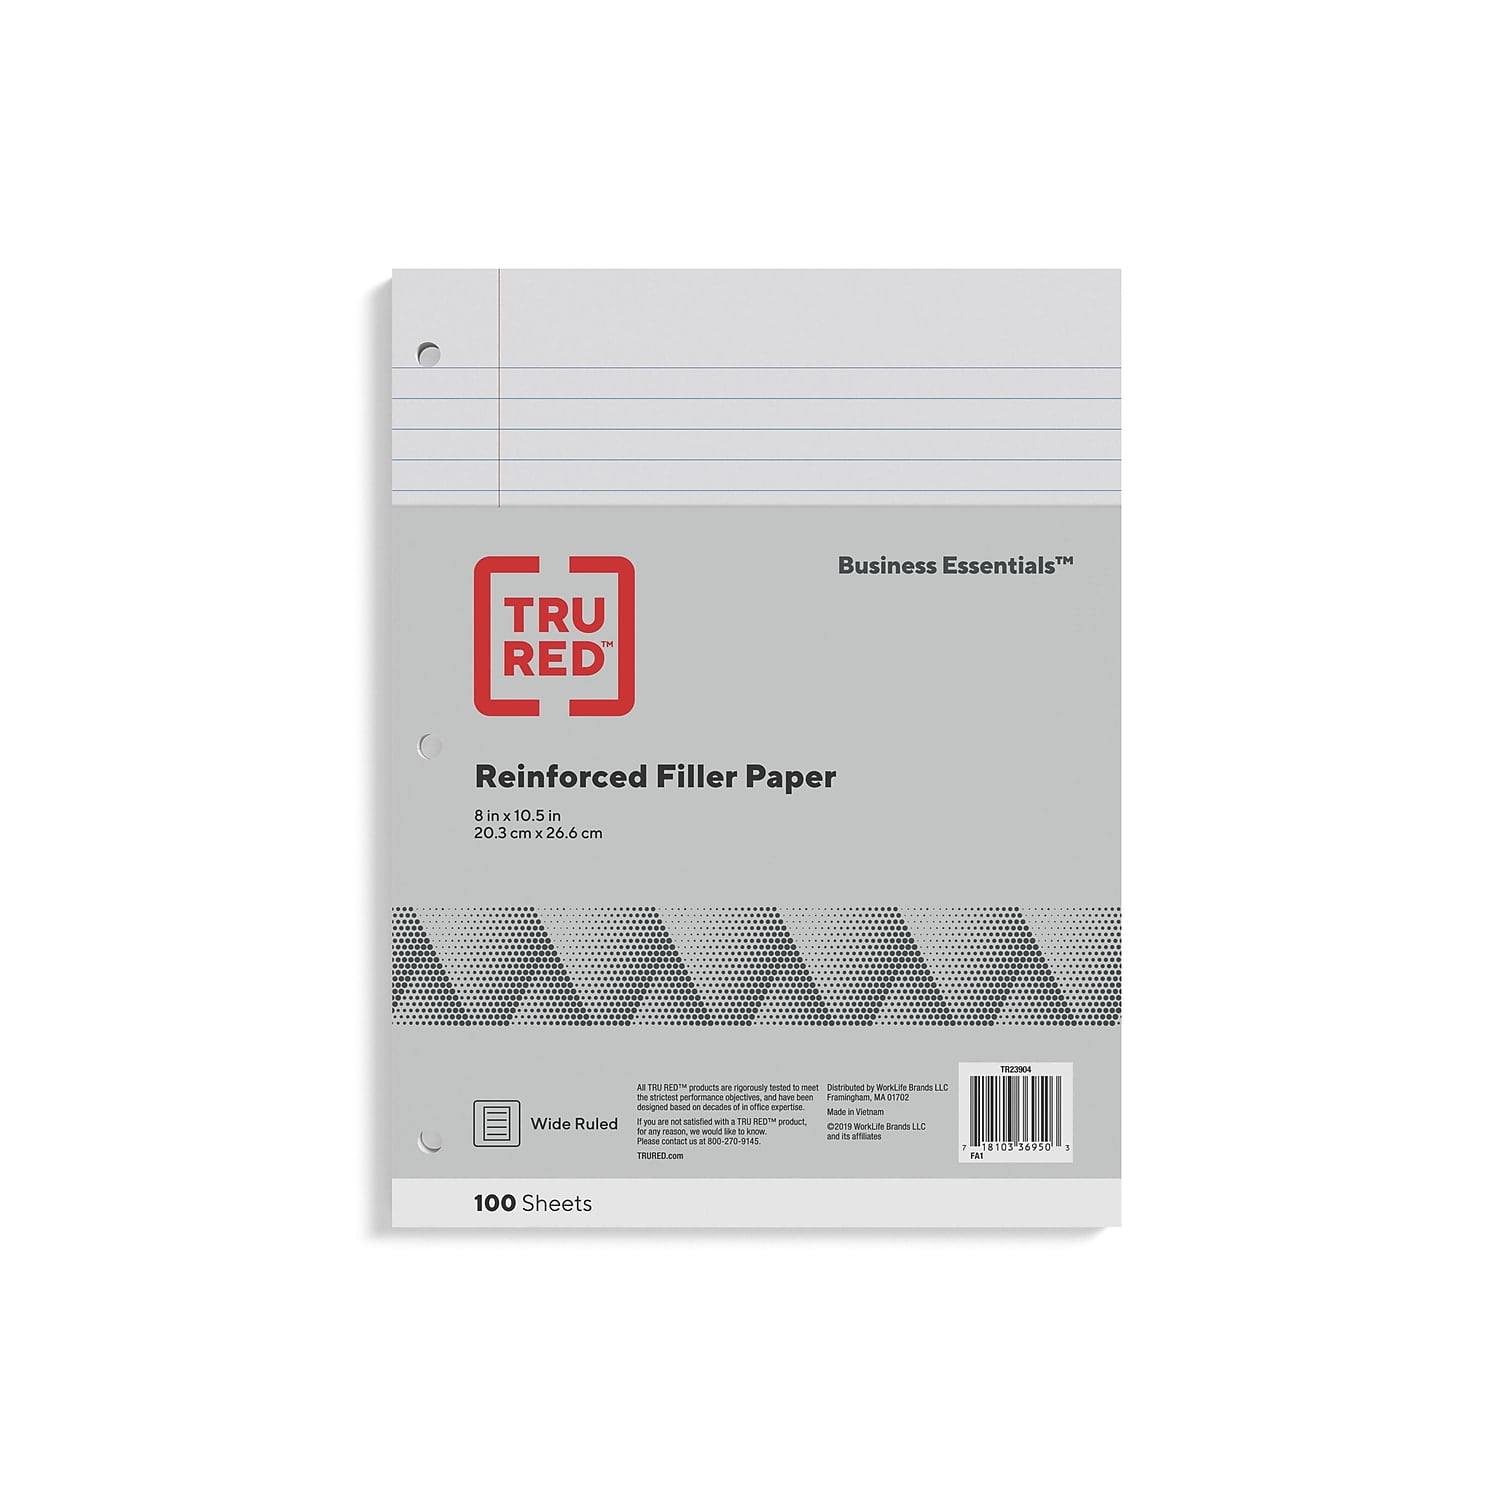 Wide Ruled Loose Leaf Paper 4pk School Supply Bundle Essential Back to School Supplies Standard 8.5x 11 Multi-Purpose Paper Hole Punched Paper for 3-Ring Binders and Folders 